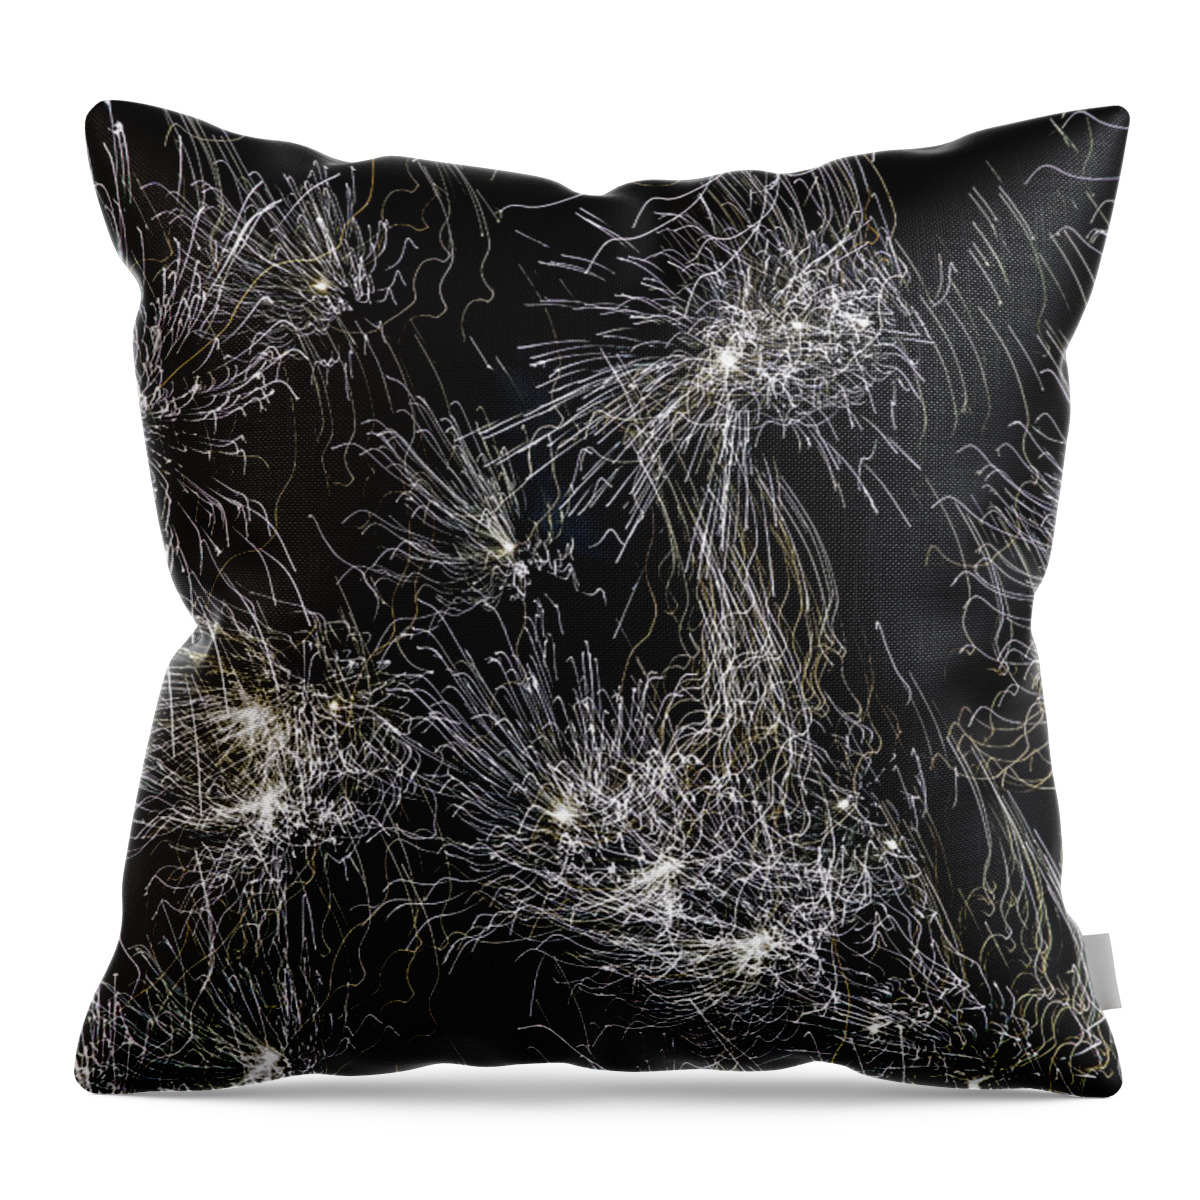 Fireworks Throw Pillow featuring the photograph Black Magic by Kate Hannon